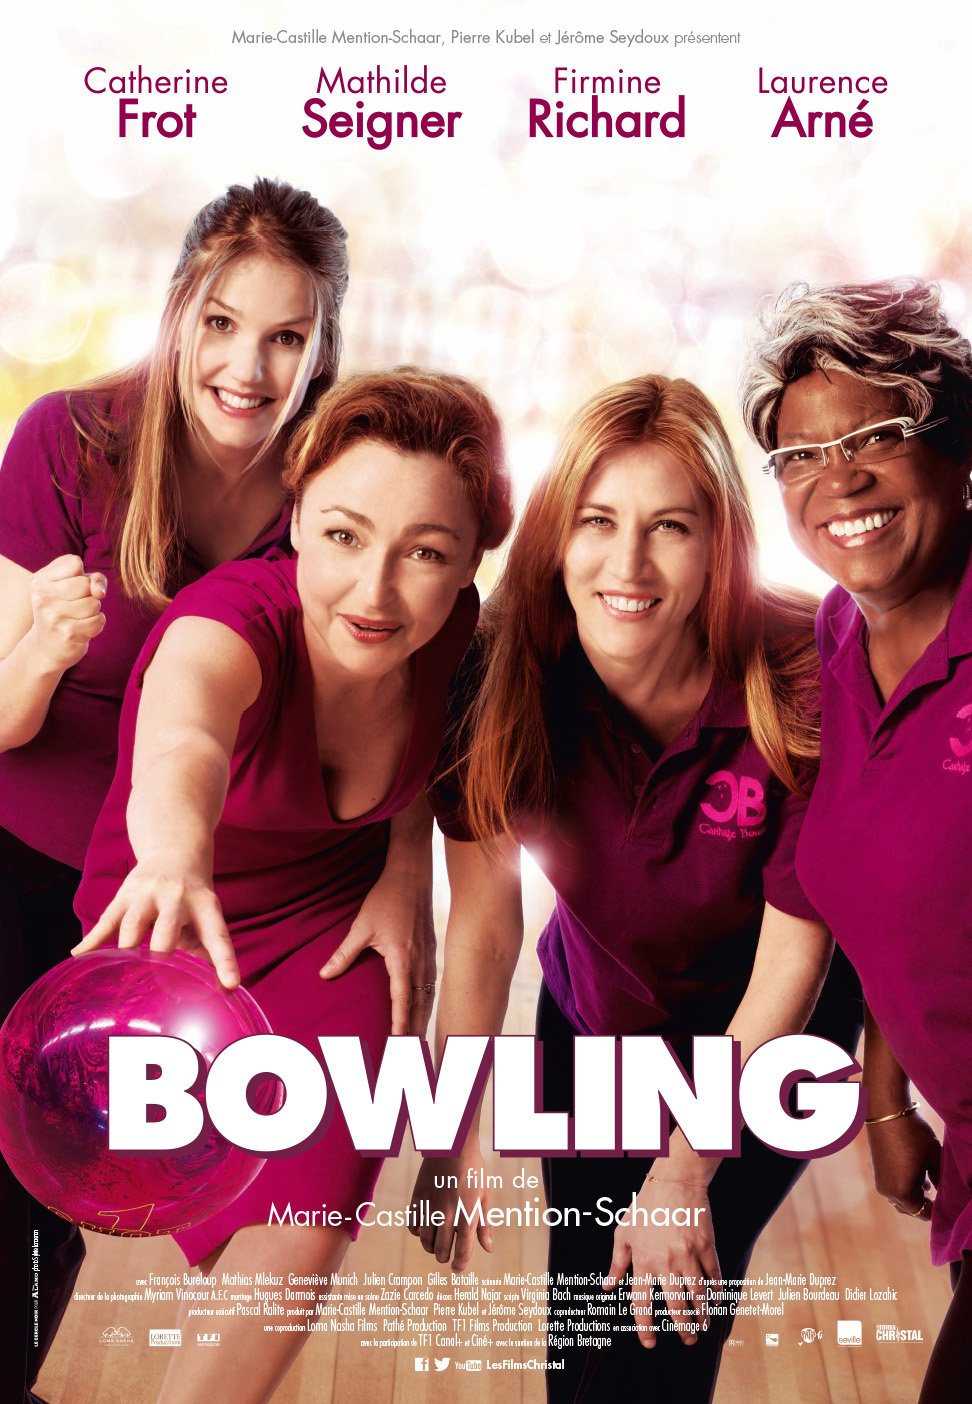 Poster of the movie Bowling